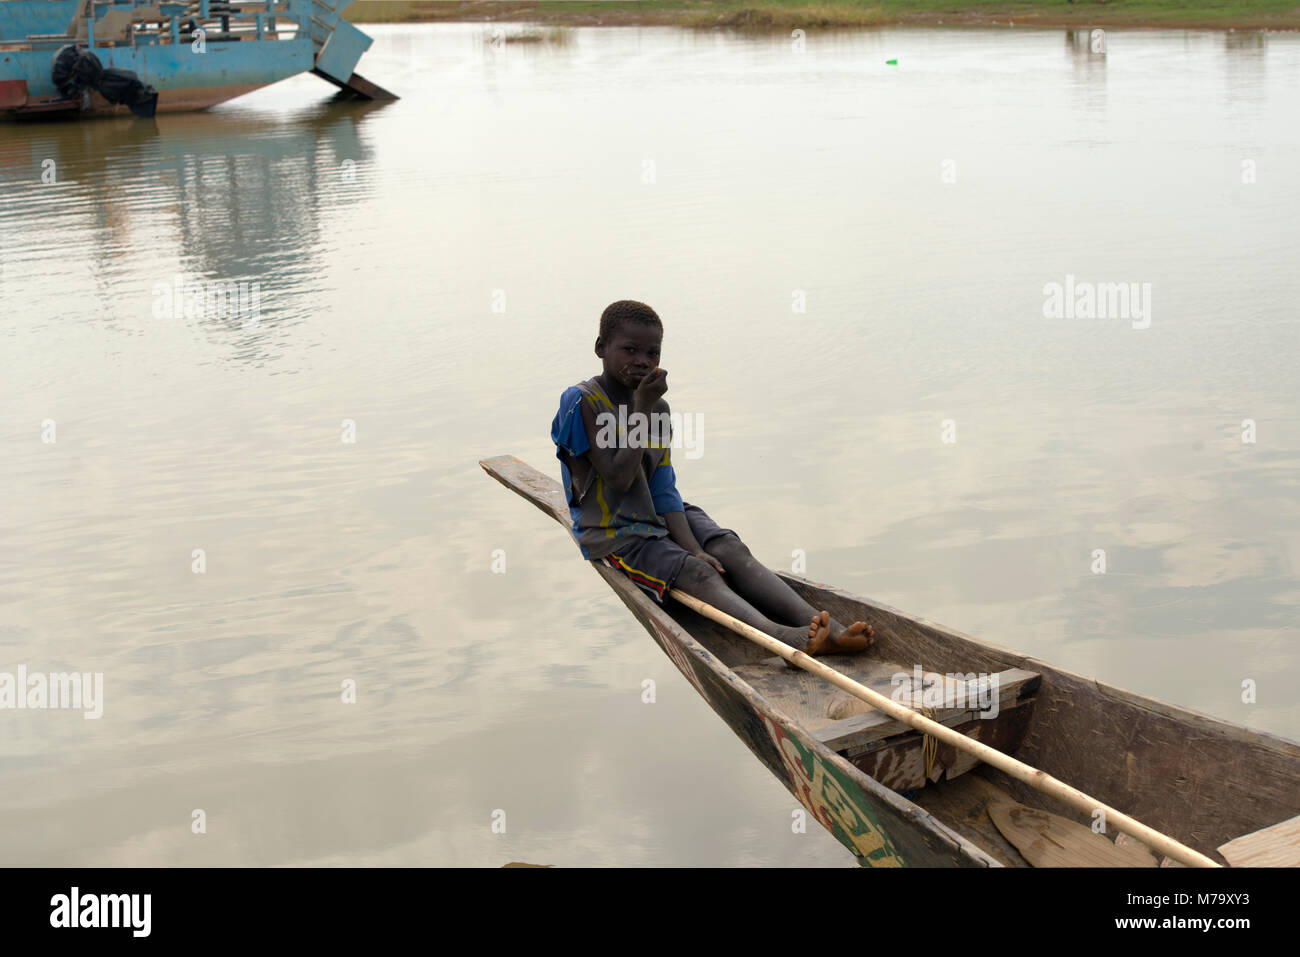 A young local boy sitting at the stern of a pirogue (traditional boat) on the River Bani. Mopti Region, Mali, West Africa. Stock Photo